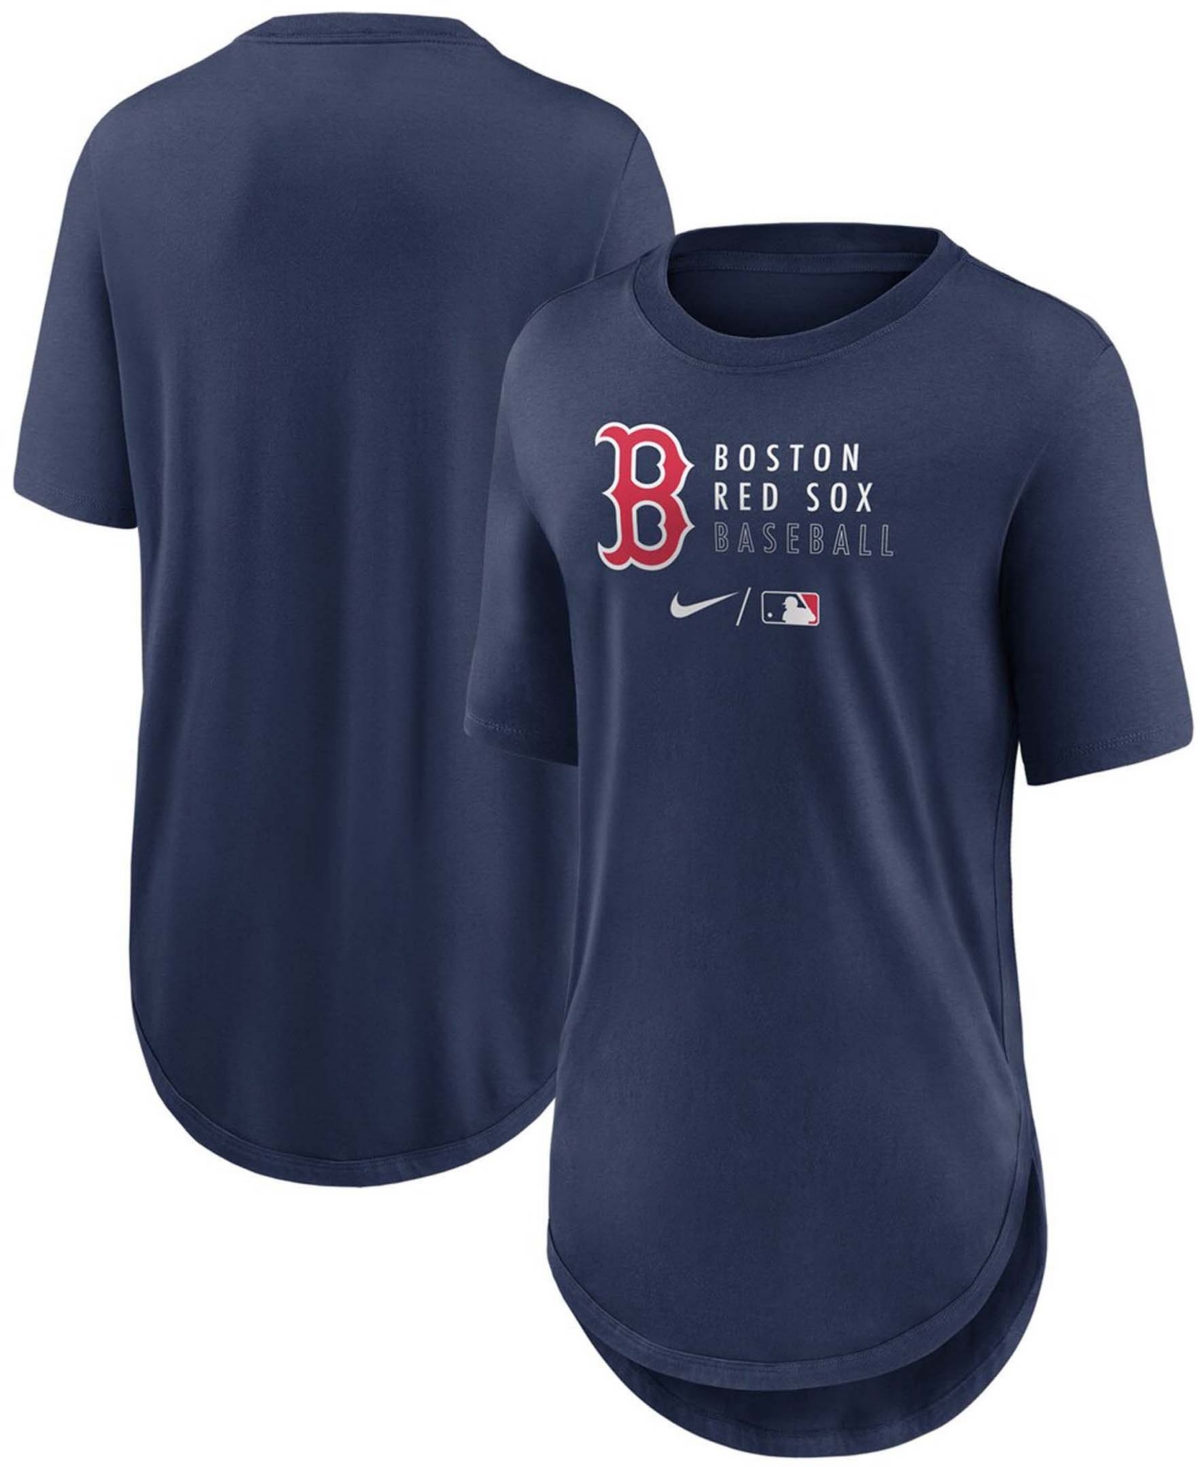 Women's Navy Boston Red Sox Authentic Collection Baseball Fashion Tri-Blend T-shirt - Navy